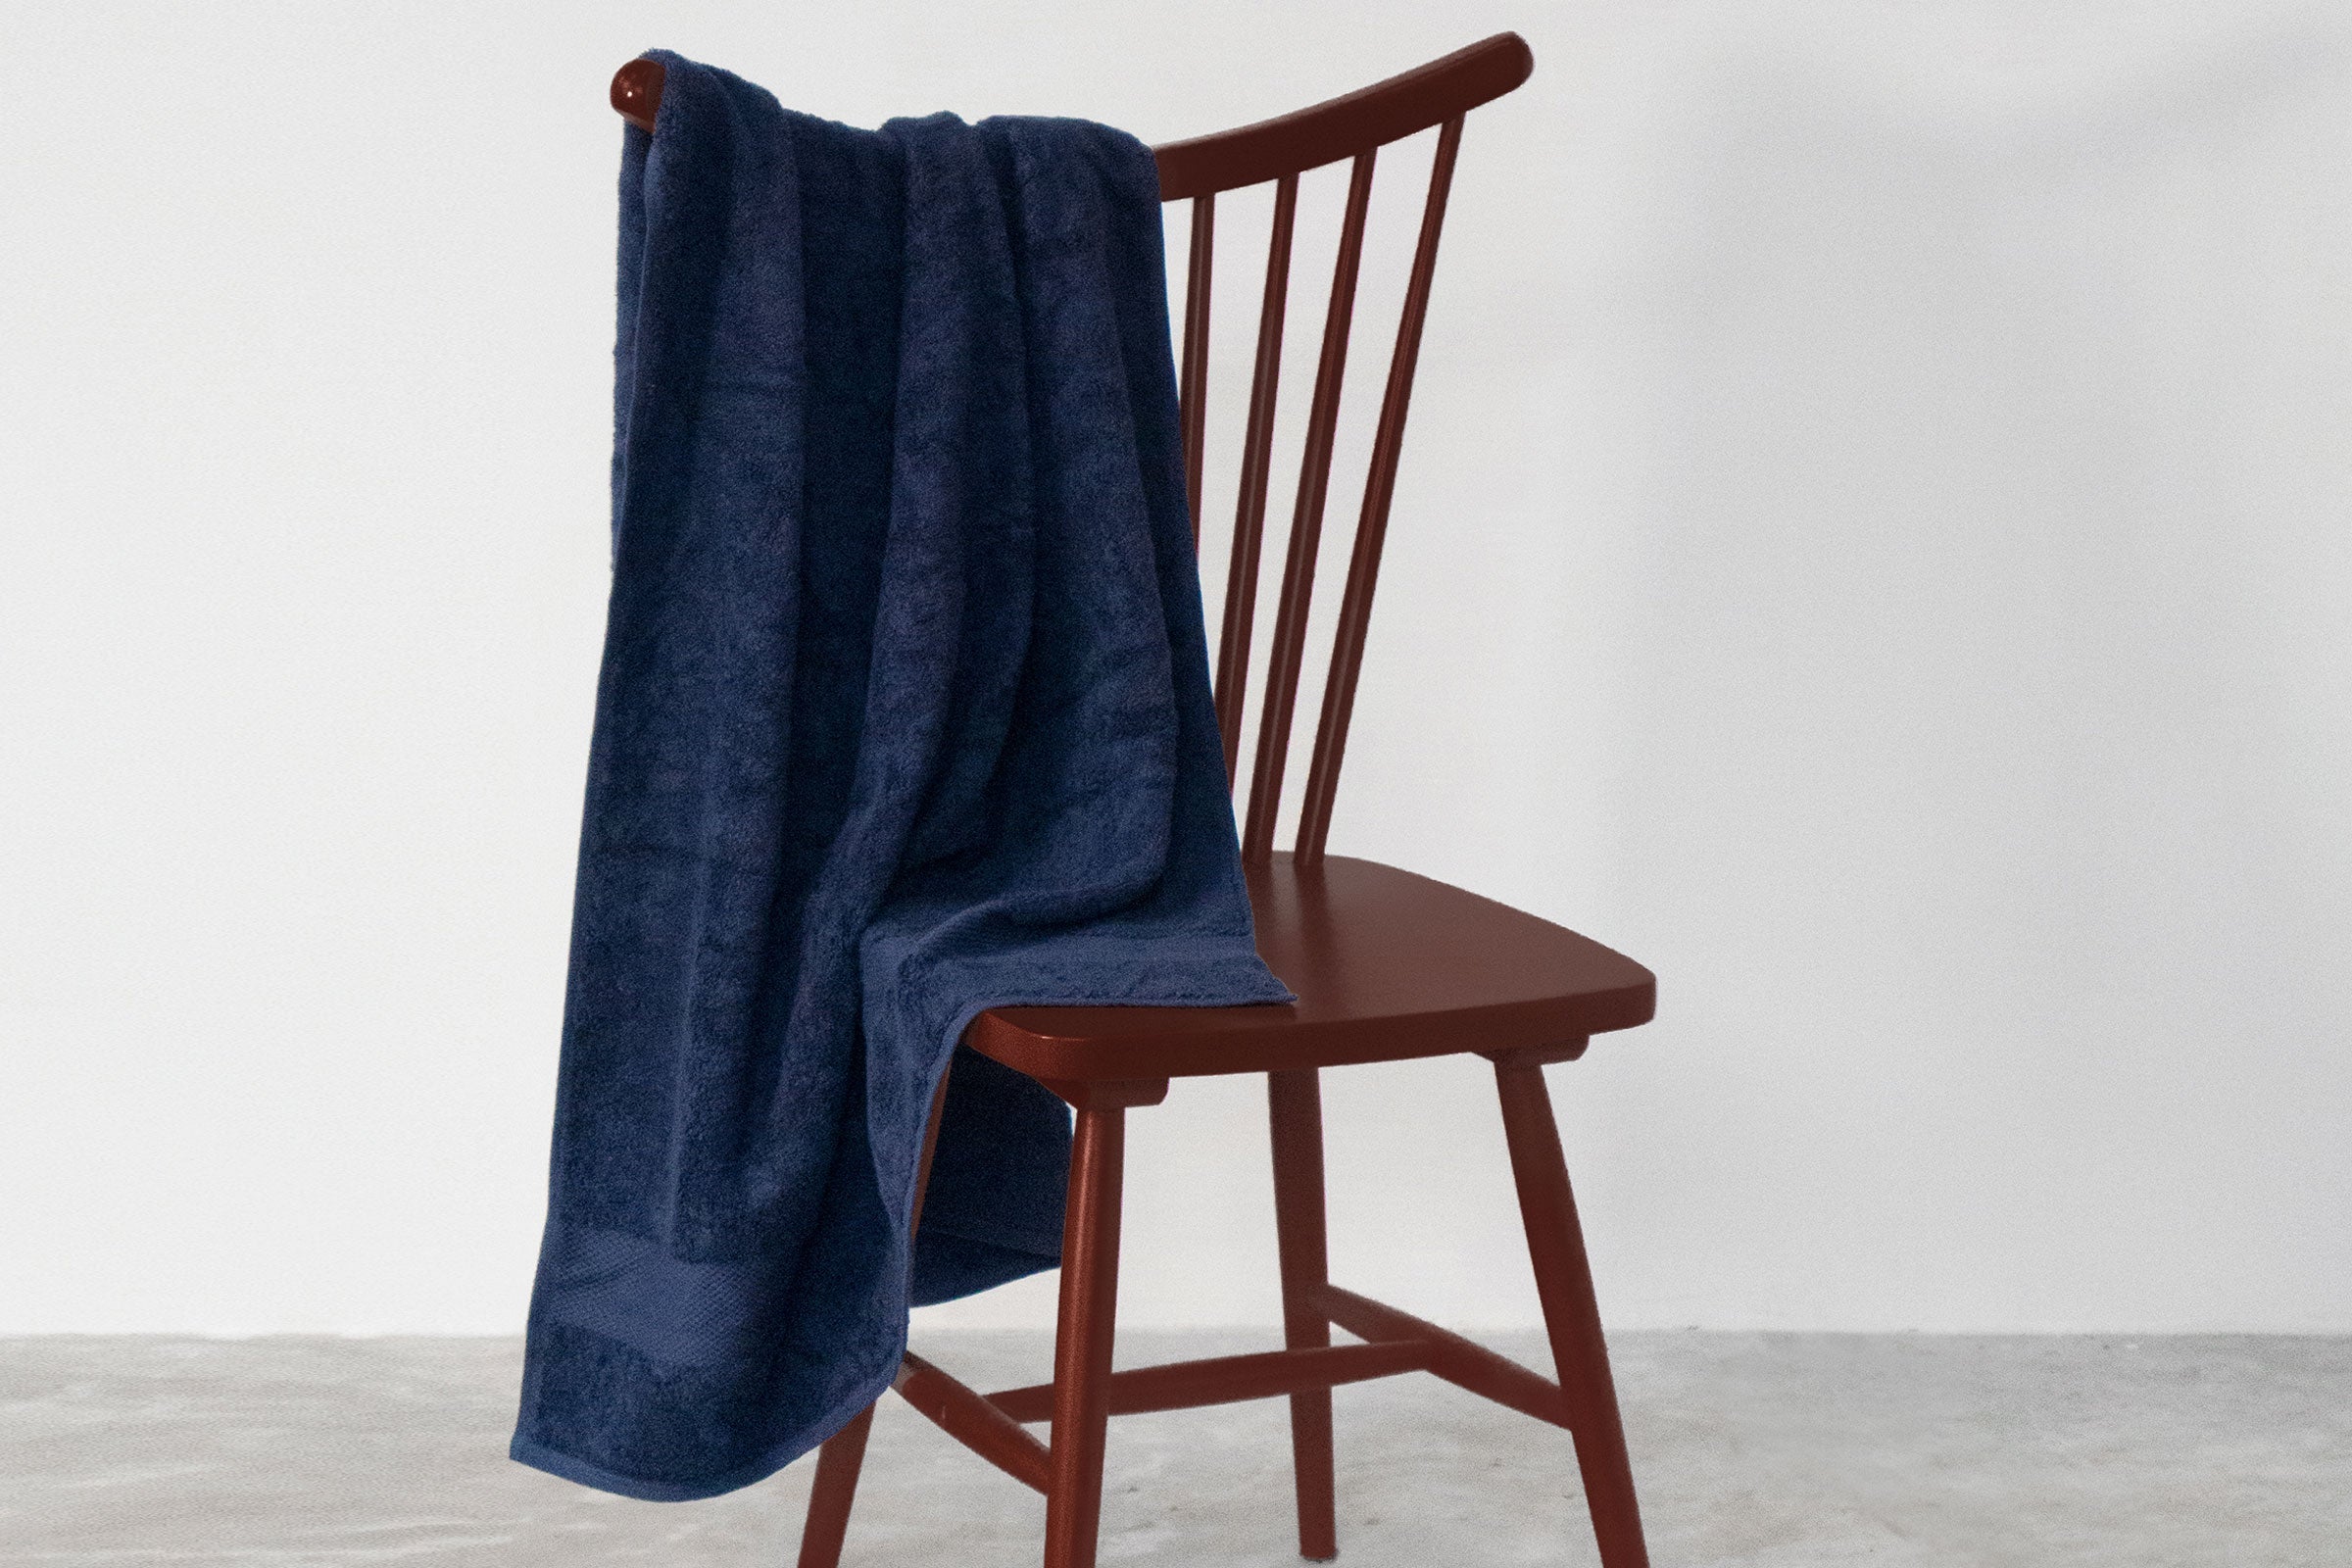 organic-cotton-bath-towel-in-navy-colour-hanging-over-a-chair-by-sojao